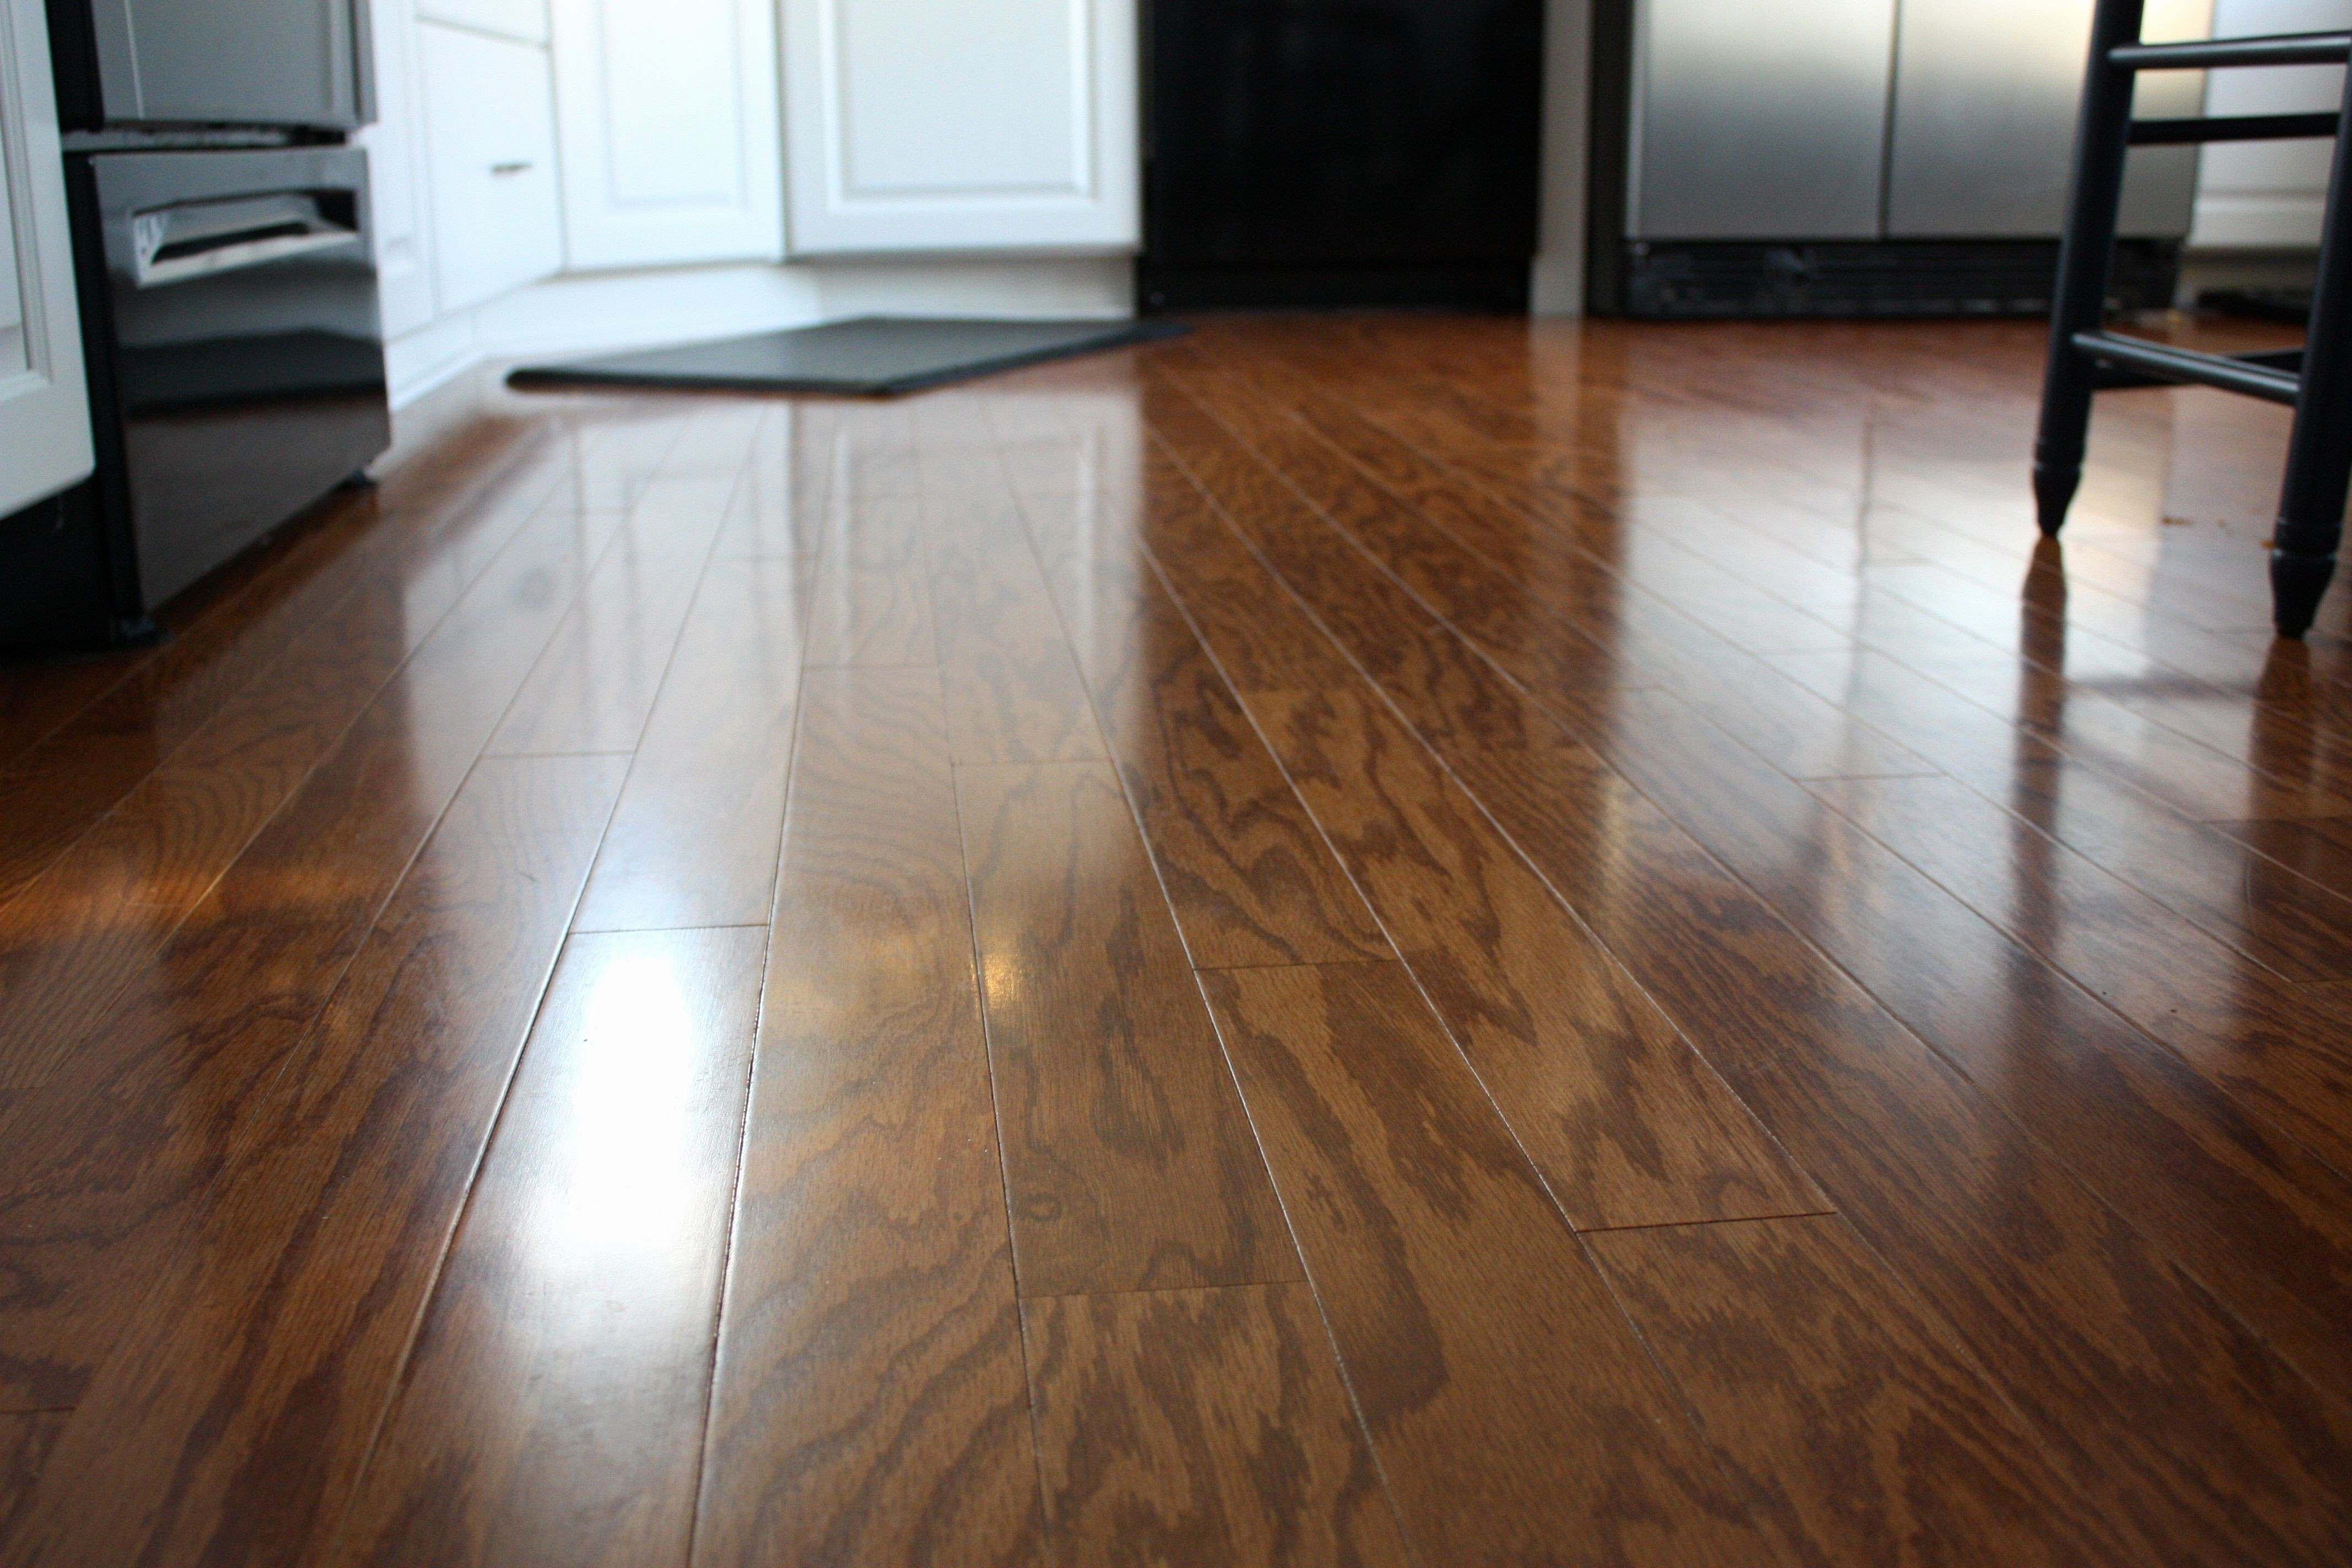 26 Ideal Hardwood Floor Refinishing Nashville Tn 2024 free download hardwood floor refinishing nashville tn of 17 awesome what to use to clean hardwood floors image dizpos com with what to use to clean hardwood floors new picture 33 of 50 what to use to